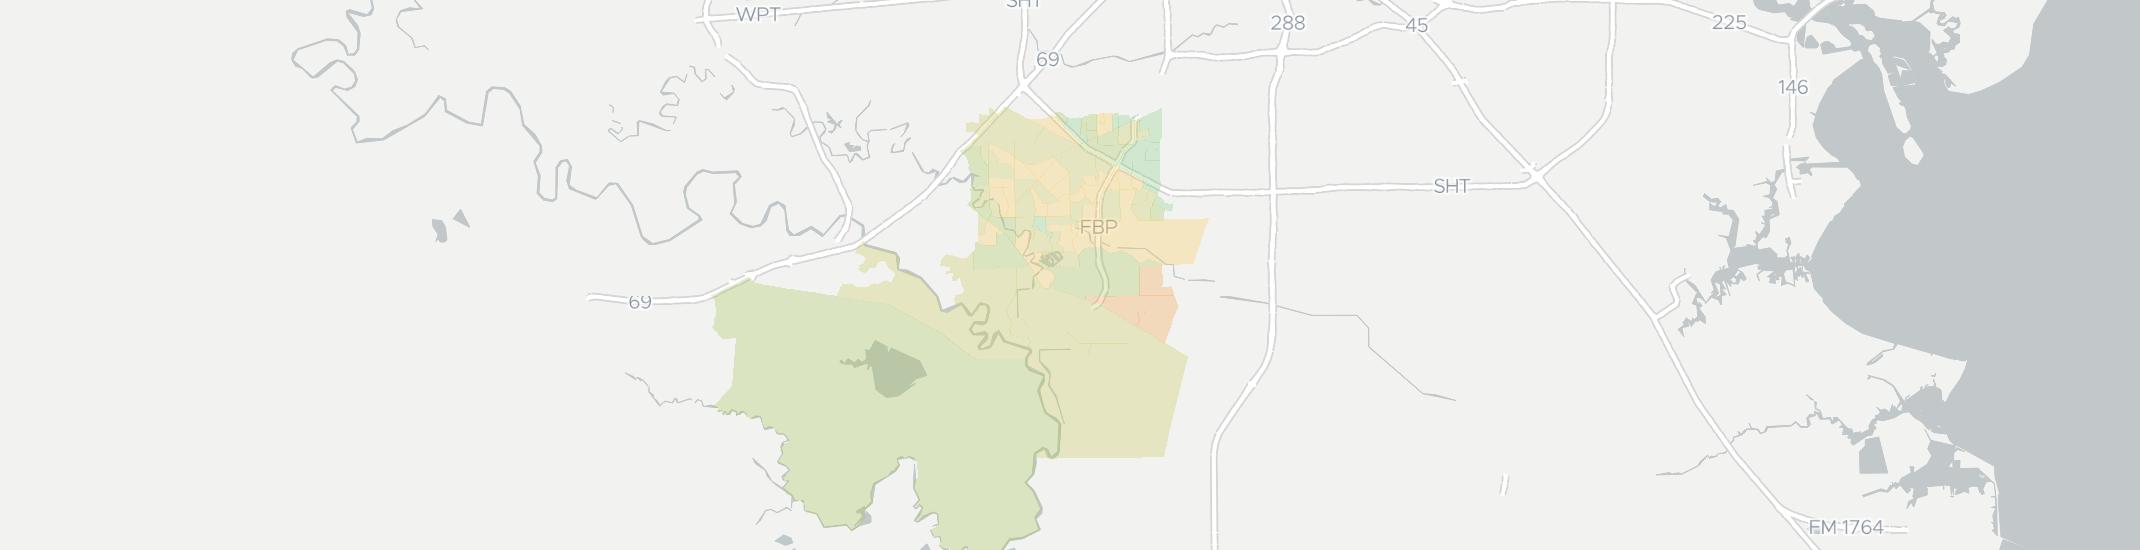 Missouri City Internet Competition Map. Click for interactive map.